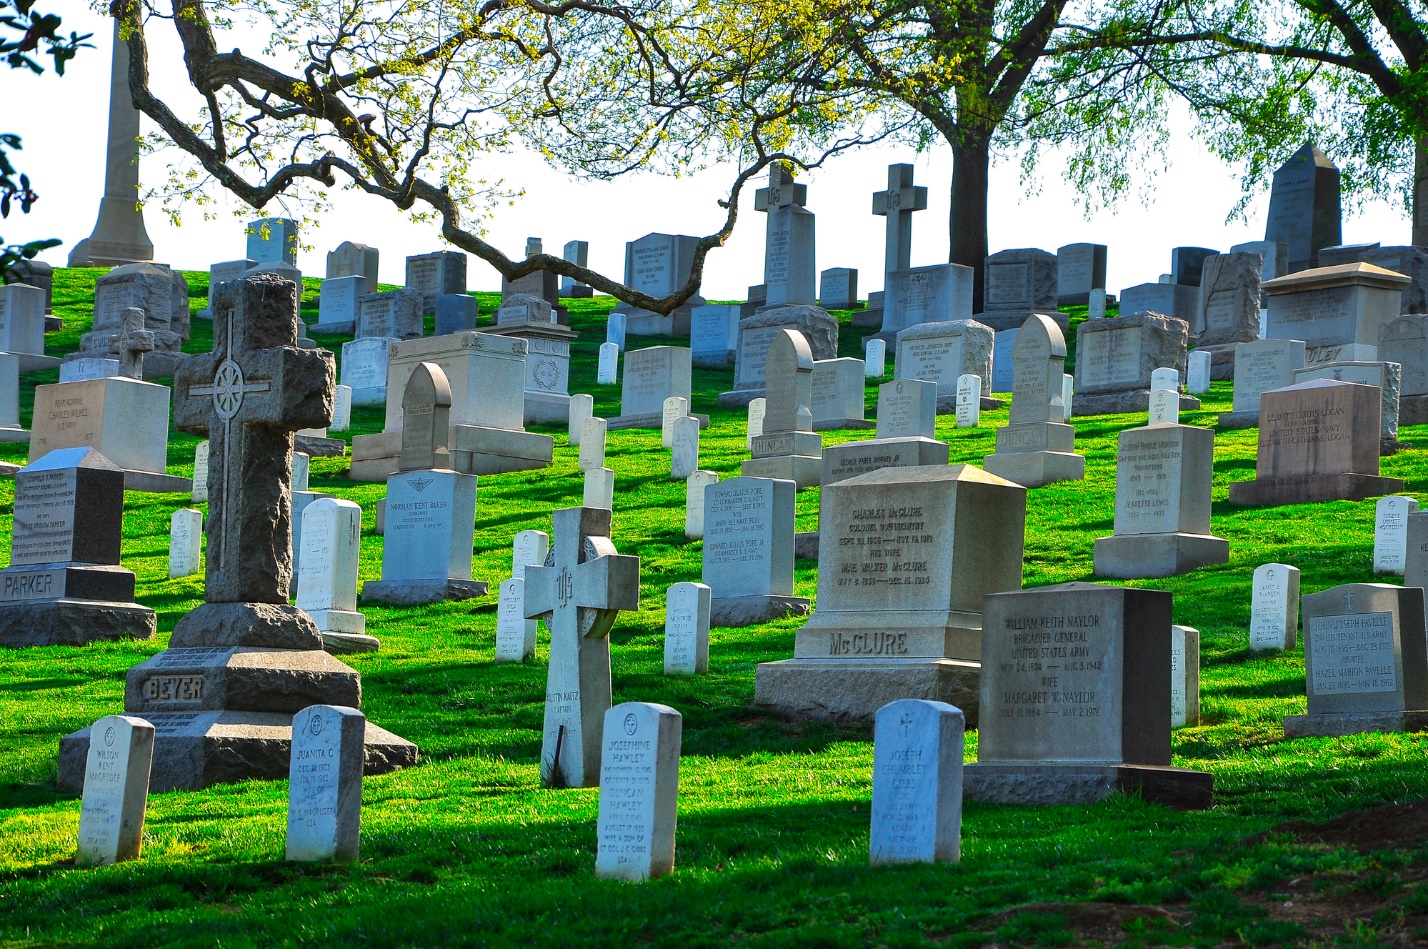 A cemetery with many tombstones

Description automatically generated with medium confidence